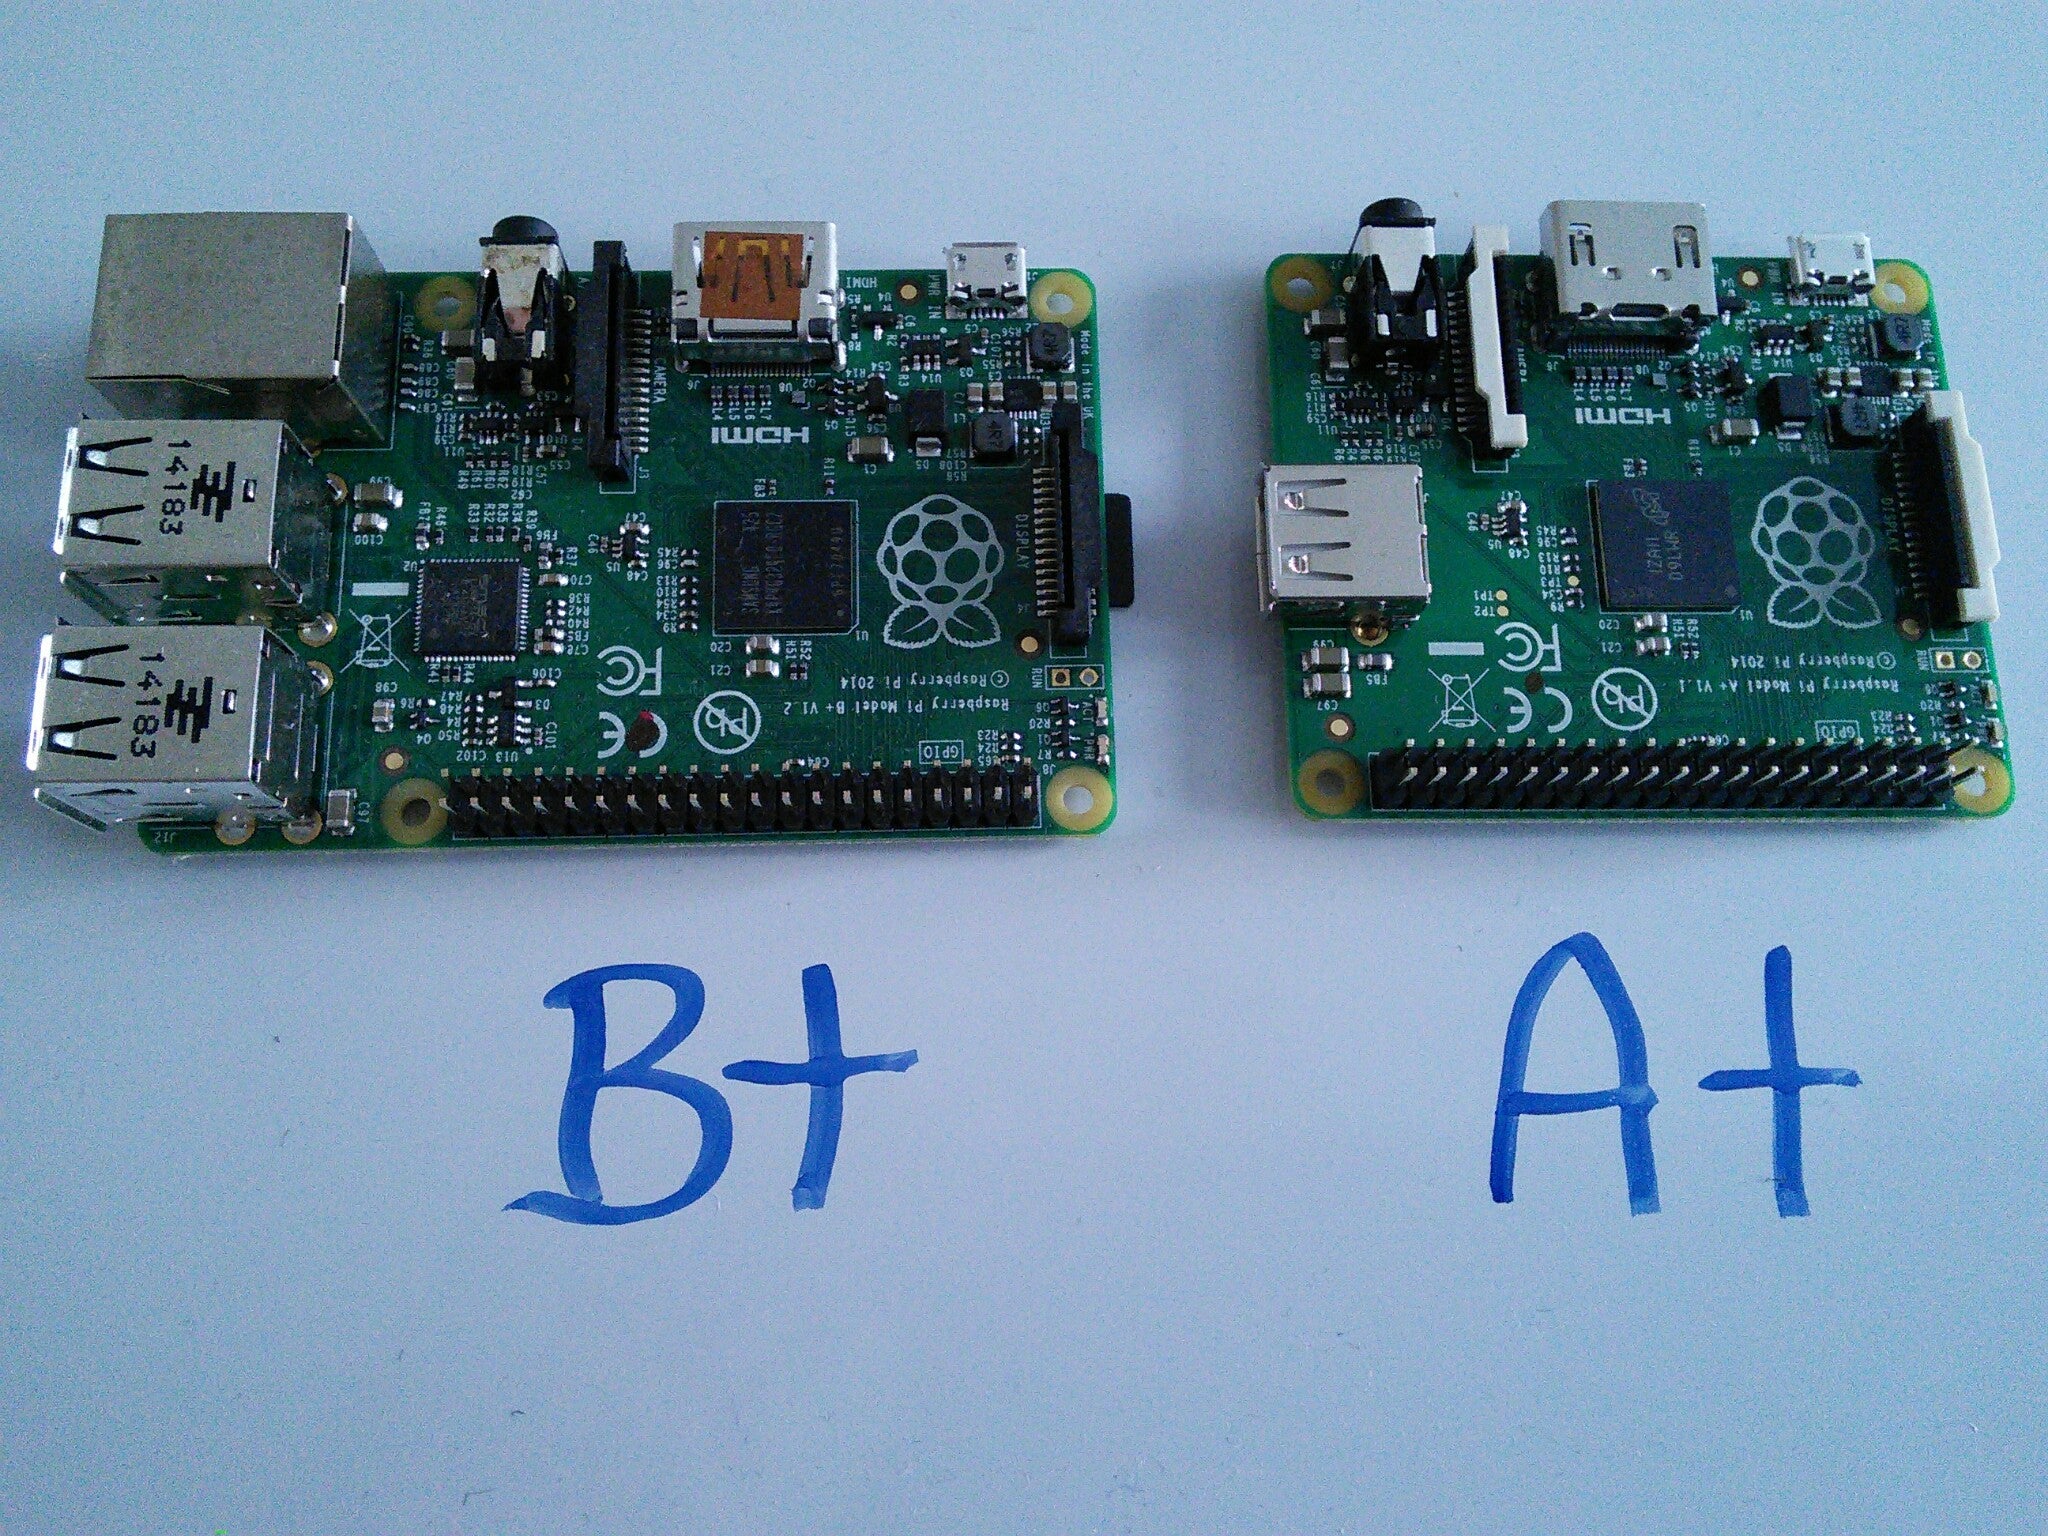 Side by side picture of Raspberry Pi B+ and A+